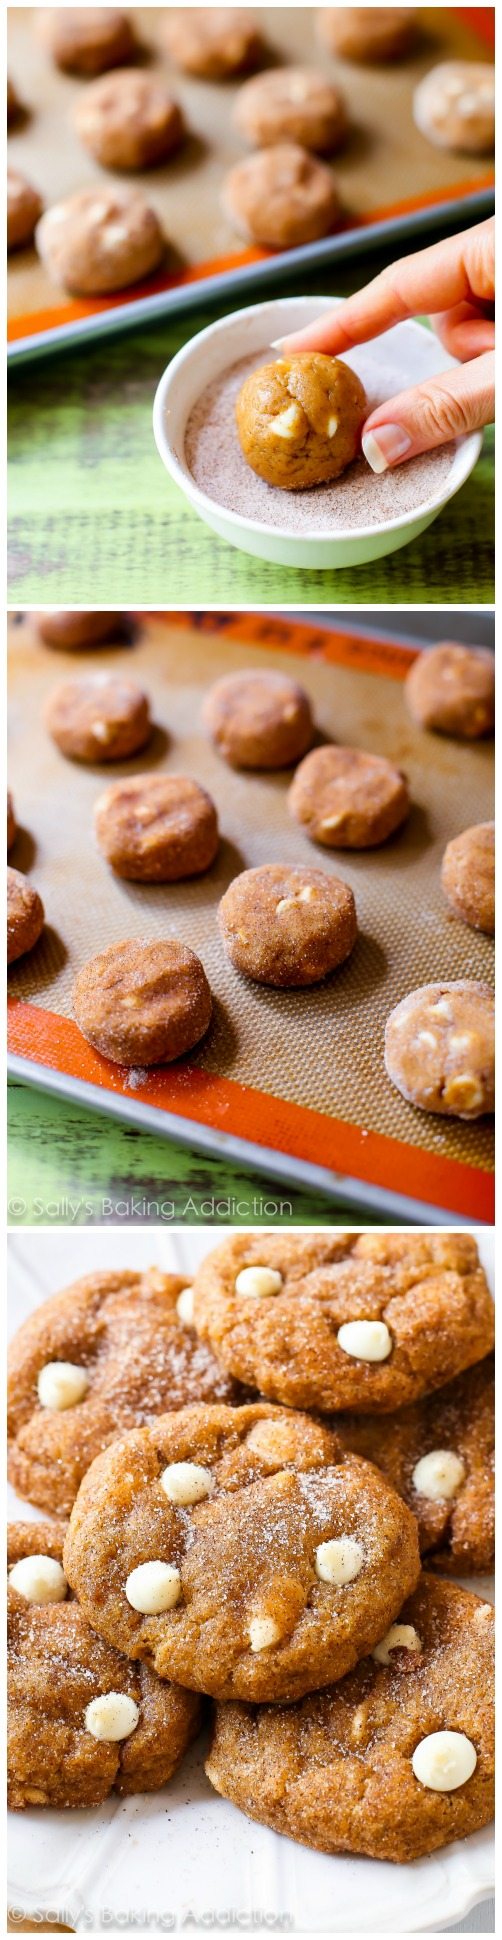 3 images showing how to make white chocolate pumpkin snickerdoodles